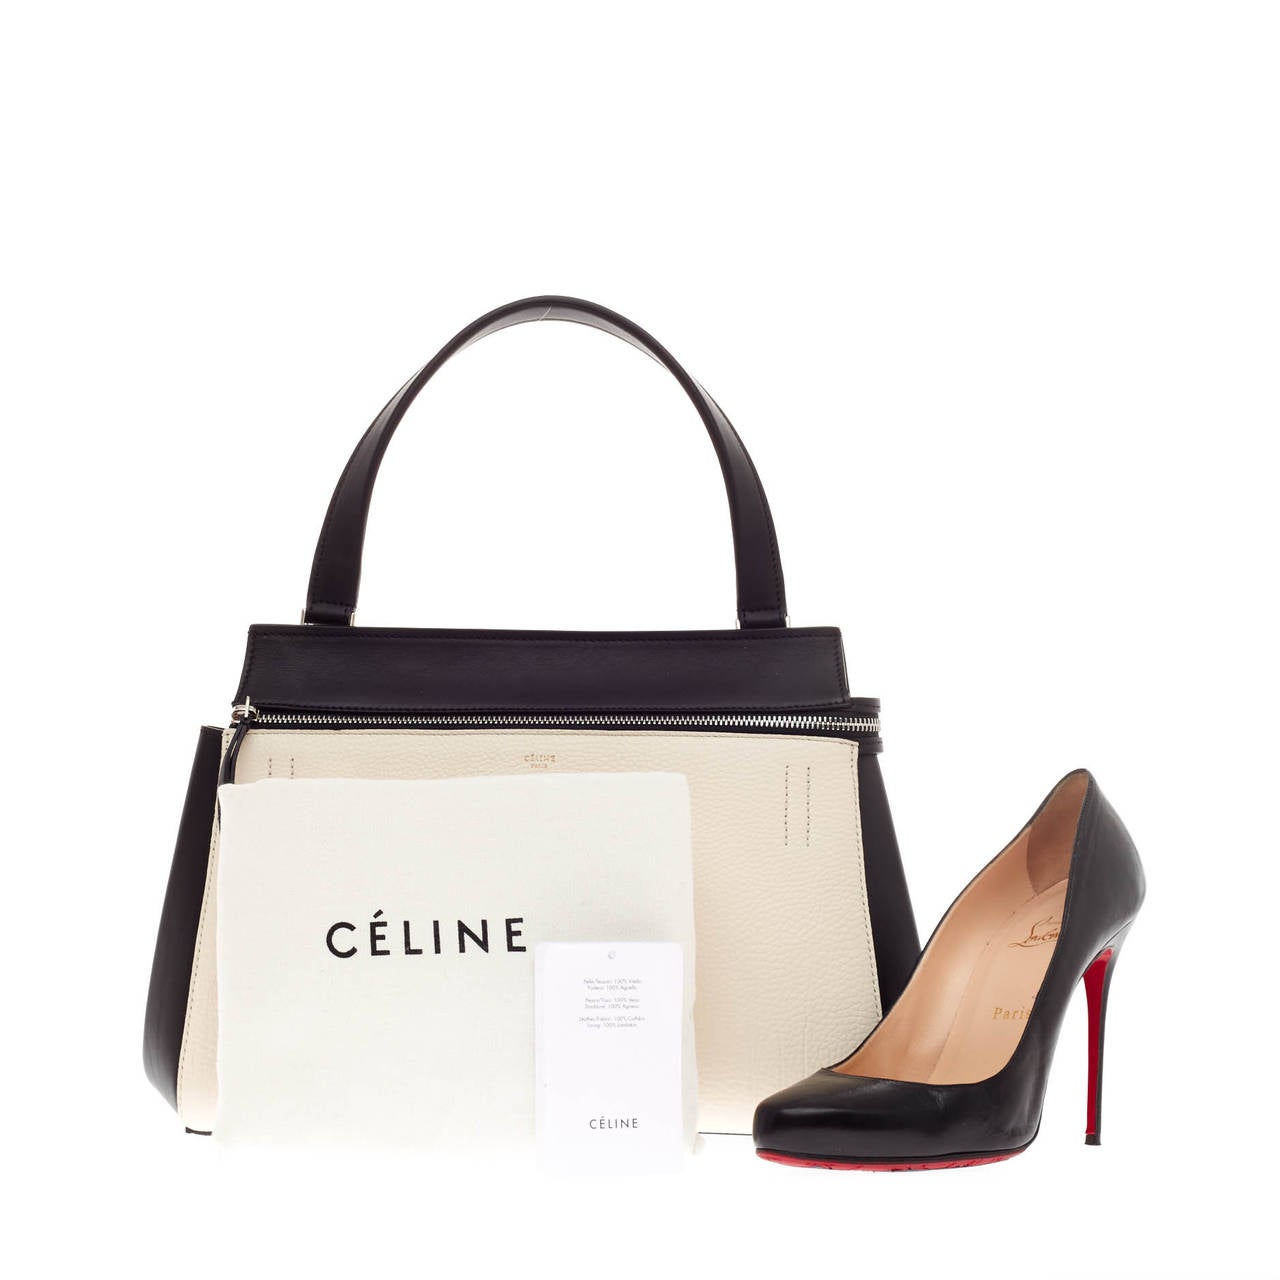 This authentic Celine Edge Bag Leather Small showcases the brand's simplicity and understated modern design perfect for the modern woman. Crafted in contrasting cream and black leather, this structured bag displays a single looped black strap,